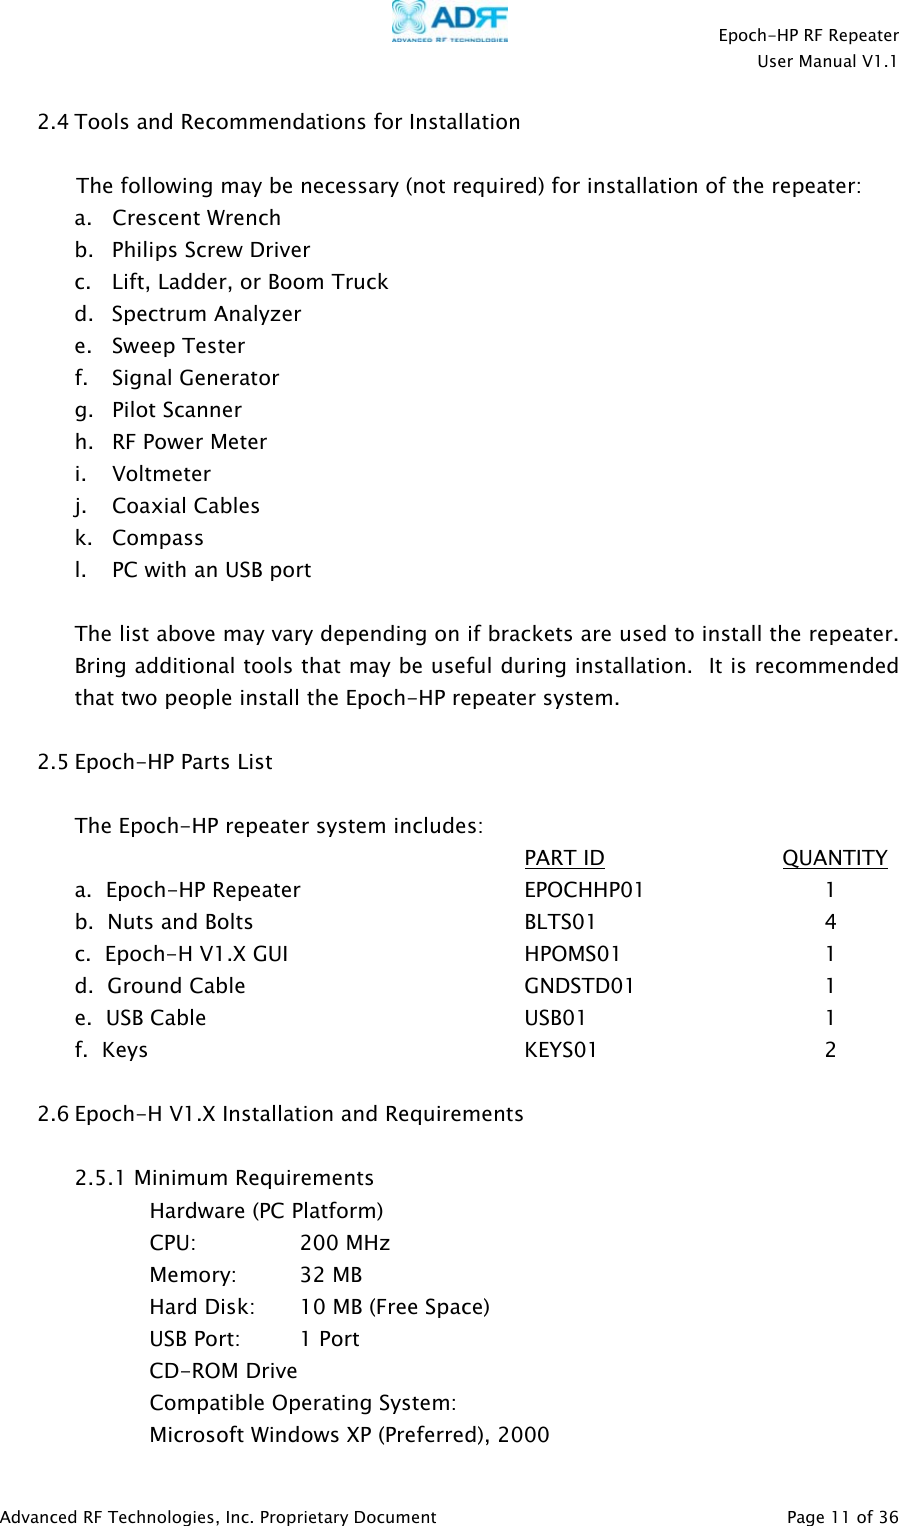    Epoch-HP RF Repeater  User Manual V1.1  Advanced RF Technologies, Inc. Proprietary Document   Page 11 of 36  2.4 Tools and Recommendations for Installation  The following may be necessary (not required) for installation of the repeater: a.   Crescent Wrench  b. Philips Screw Driver c. Lift, Ladder, or Boom Truck d. Spectrum Analyzer e. Sweep Tester f. Signal Generator g. Pilot Scanner h. RF Power Meter i. Voltmeter j. Coaxial Cables k. Compass l. PC with an USB port   The list above may vary depending on if brackets are used to install the repeater.  Bring additional tools that may be useful during installation.  It is recommended that two people install the Epoch-HP repeater system.  2.5 Epoch-HP Parts List  The Epoch-HP repeater system includes:       PART ID              QUANTITY a.  Epoch-HP Repeater   EPOCHHP01   1  b.  Nuts and Bolts        BLTS01    4 c.  Epoch-H V1.X GUI     HPOMS01   1 d.  Ground Cable    GNDSTD01   1  e.  USB Cable     USB01    1  f.  Keys      KEYS01   2  2.6 Epoch-H V1.X Installation and Requirements  2.5.1 Minimum Requirements Hardware (PC Platform) CPU:     200 MHz   Memory: 32 MB     Hard Disk:  10 MB (Free Space)     USB Port:    1 Port   CD-ROM Drive Compatible Operating System:     Microsoft Windows XP (Preferred), 2000 